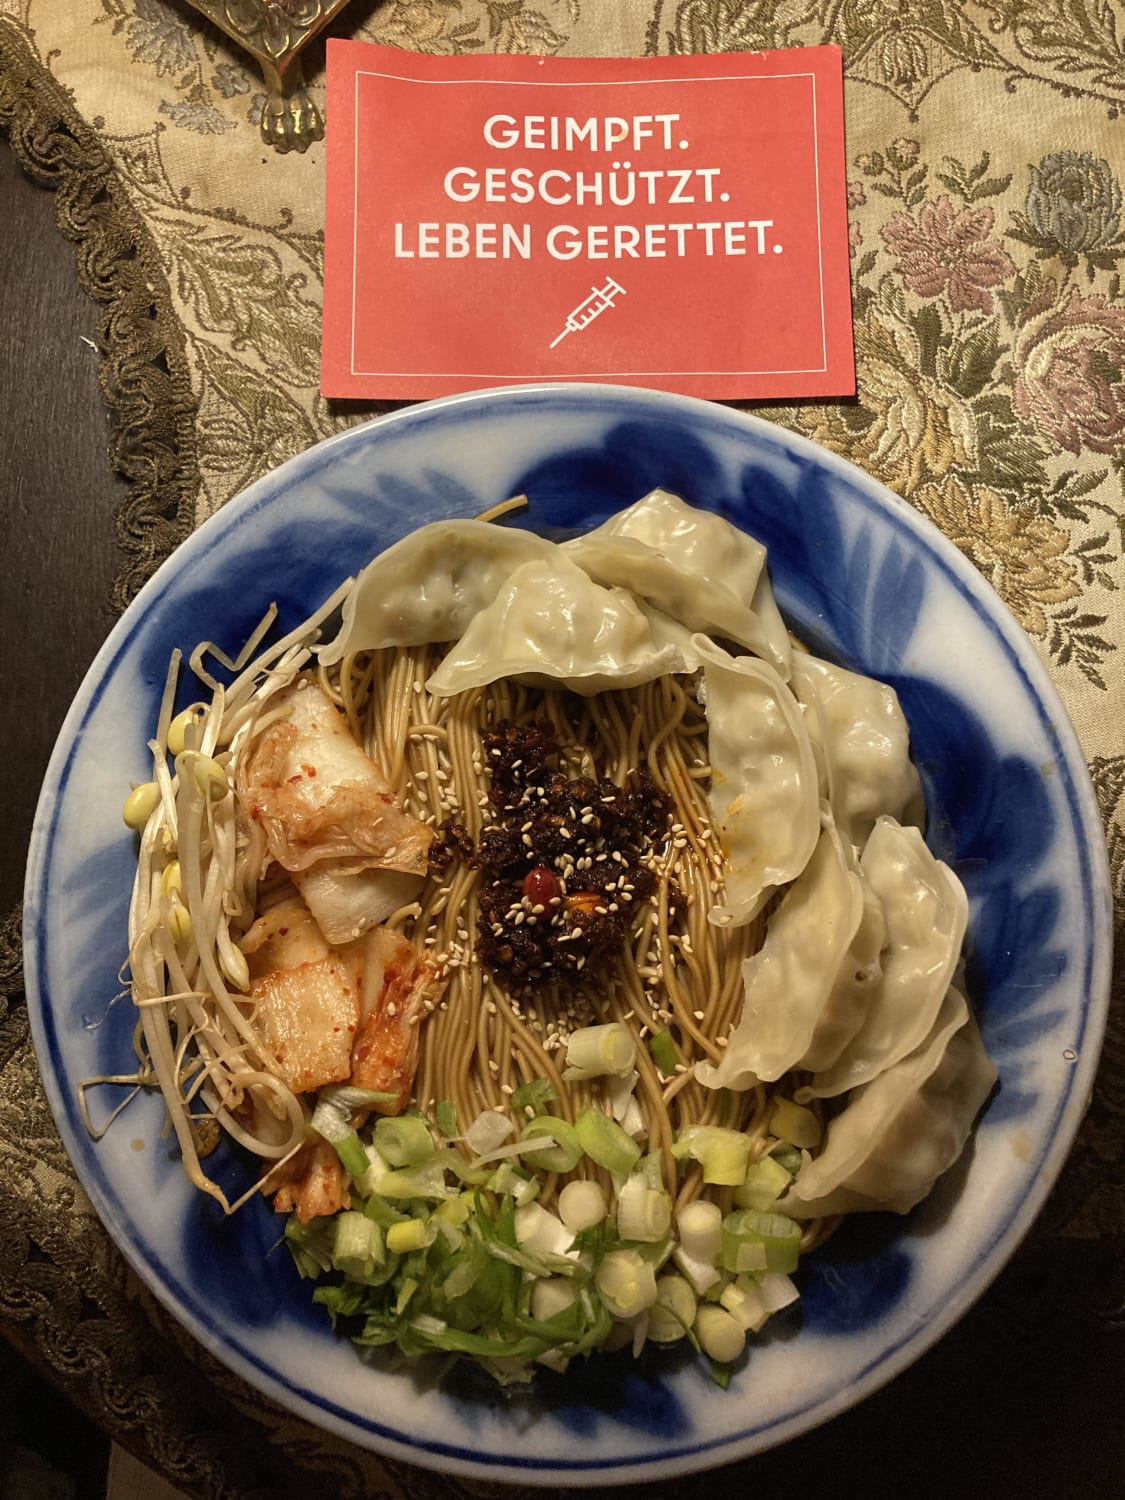 Greetings from Germany! At home feeling sick after my booster shot, so I quickly whipped up some ramen (broth: ginger+mushroom dark soy sauce+Soon veggie ramen seasoning packet) with various add-ons: (veggie dumplings, spring onions, kimchi, bean sprouts, sesame seeds, and Lao Gan Ma chili crisp) 😍